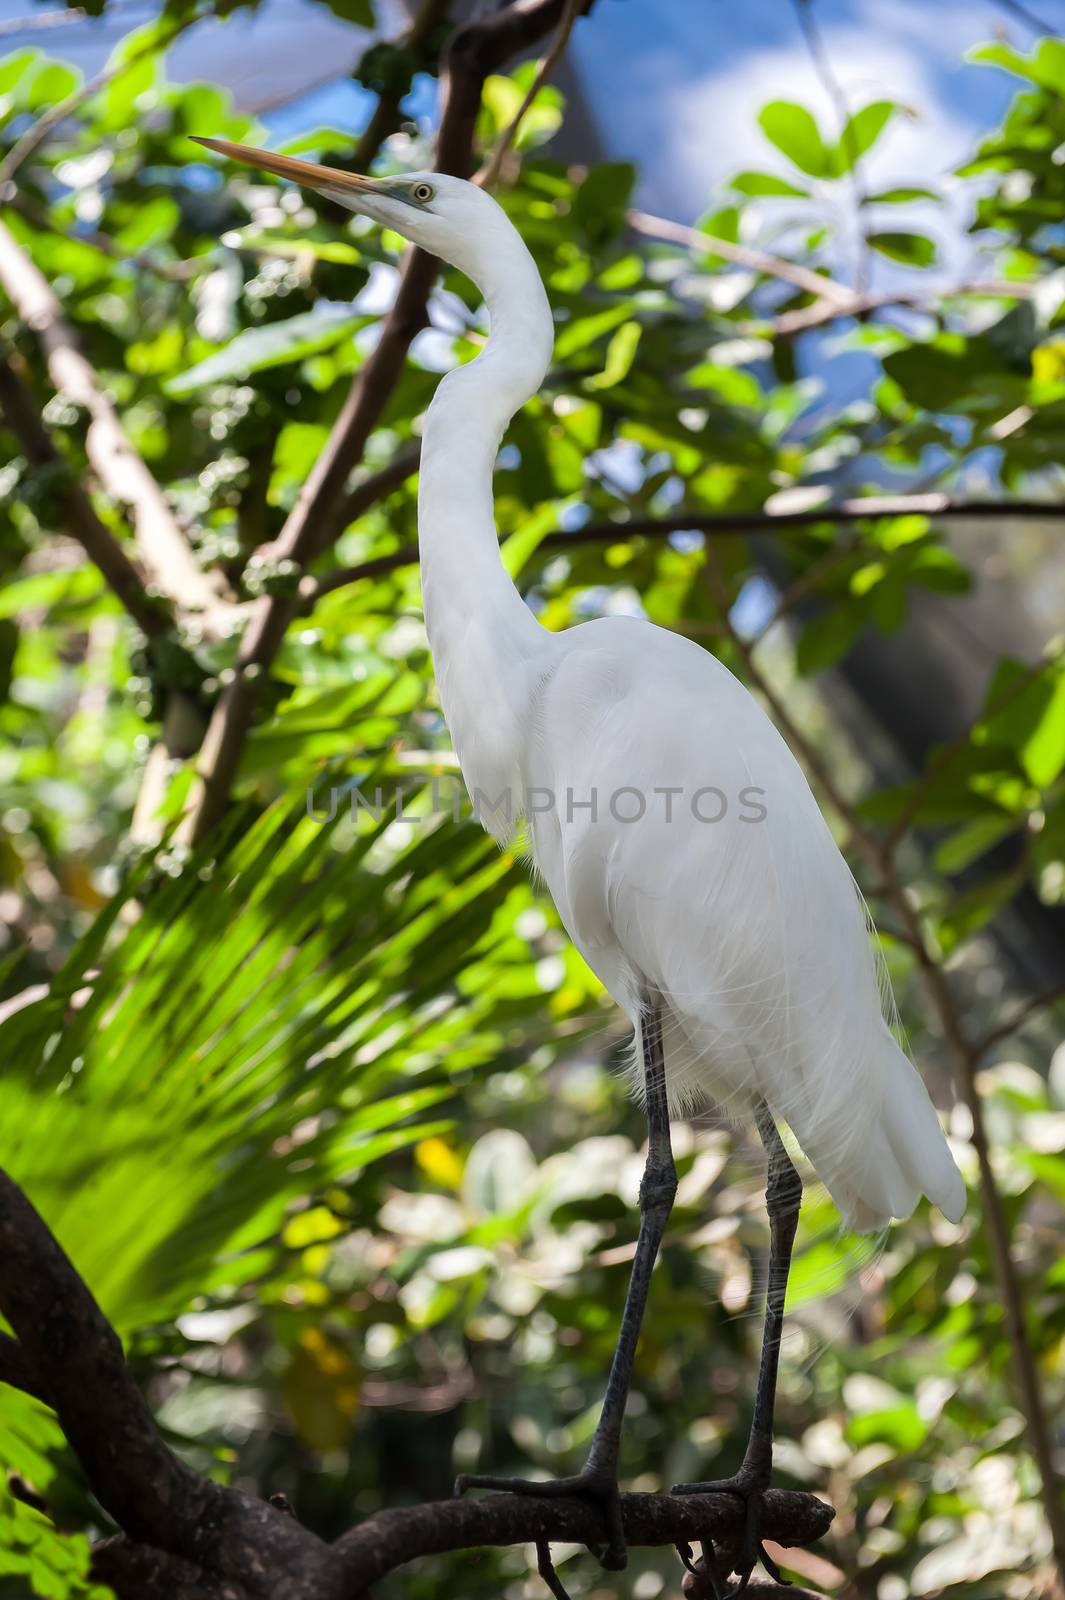 Heron sitting on brunch, in a jungle.